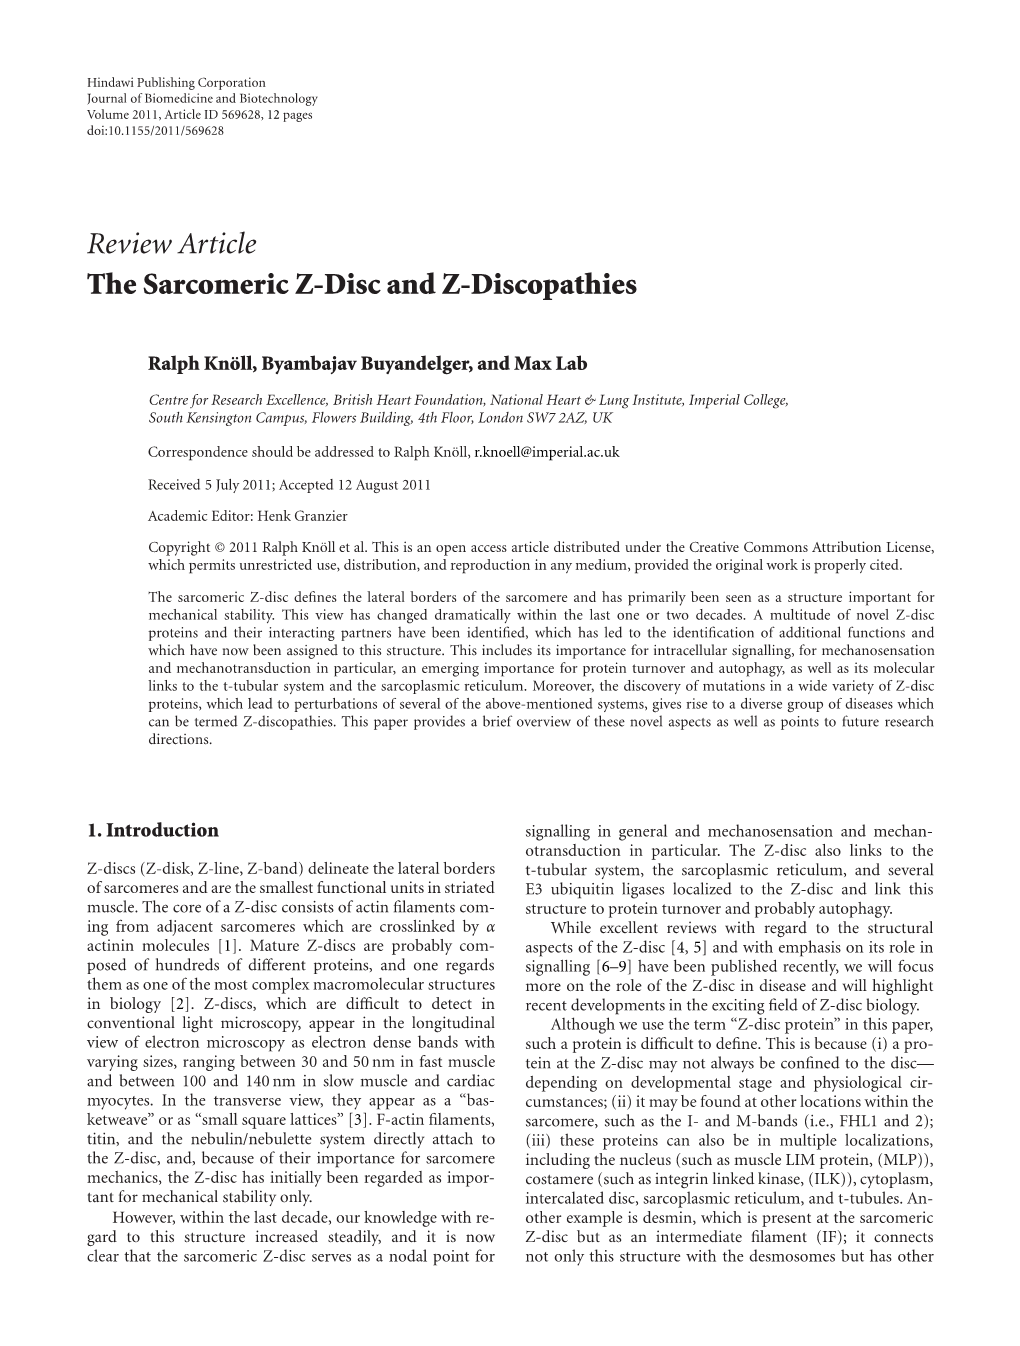 Review Article the Sarcomeric Z-Disc and Z-Discopathies